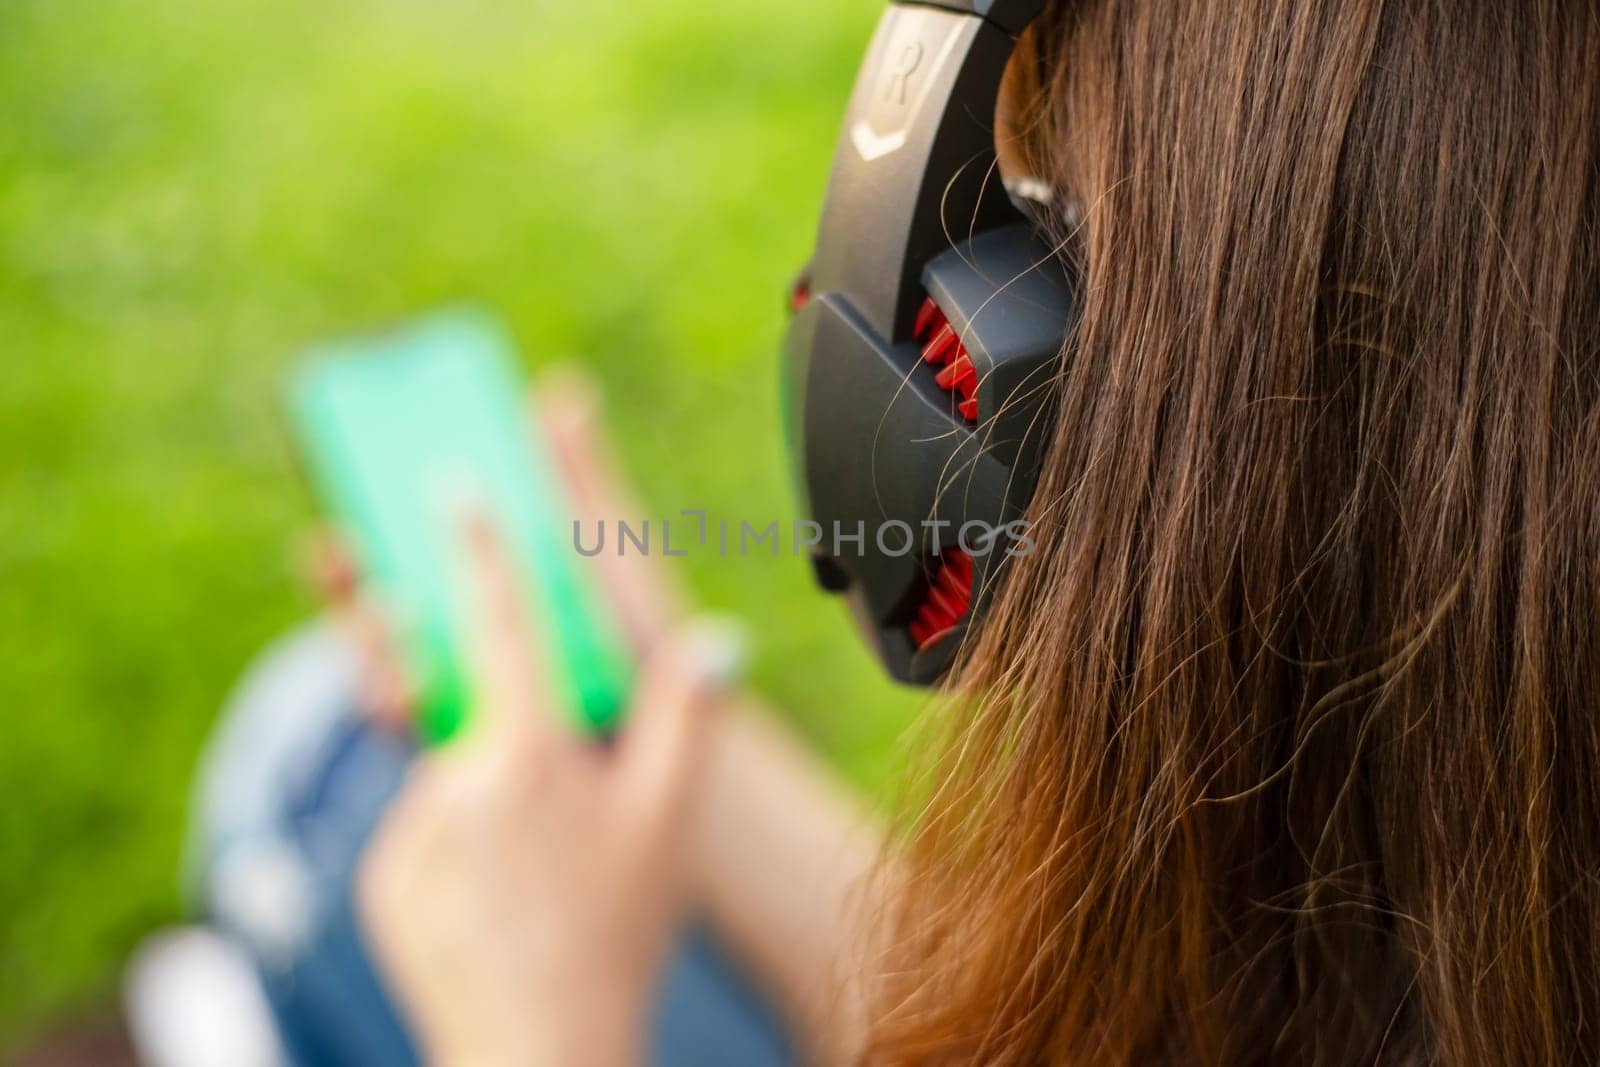 A woman is holding a smartphone and listening to music on headphones by andreyz